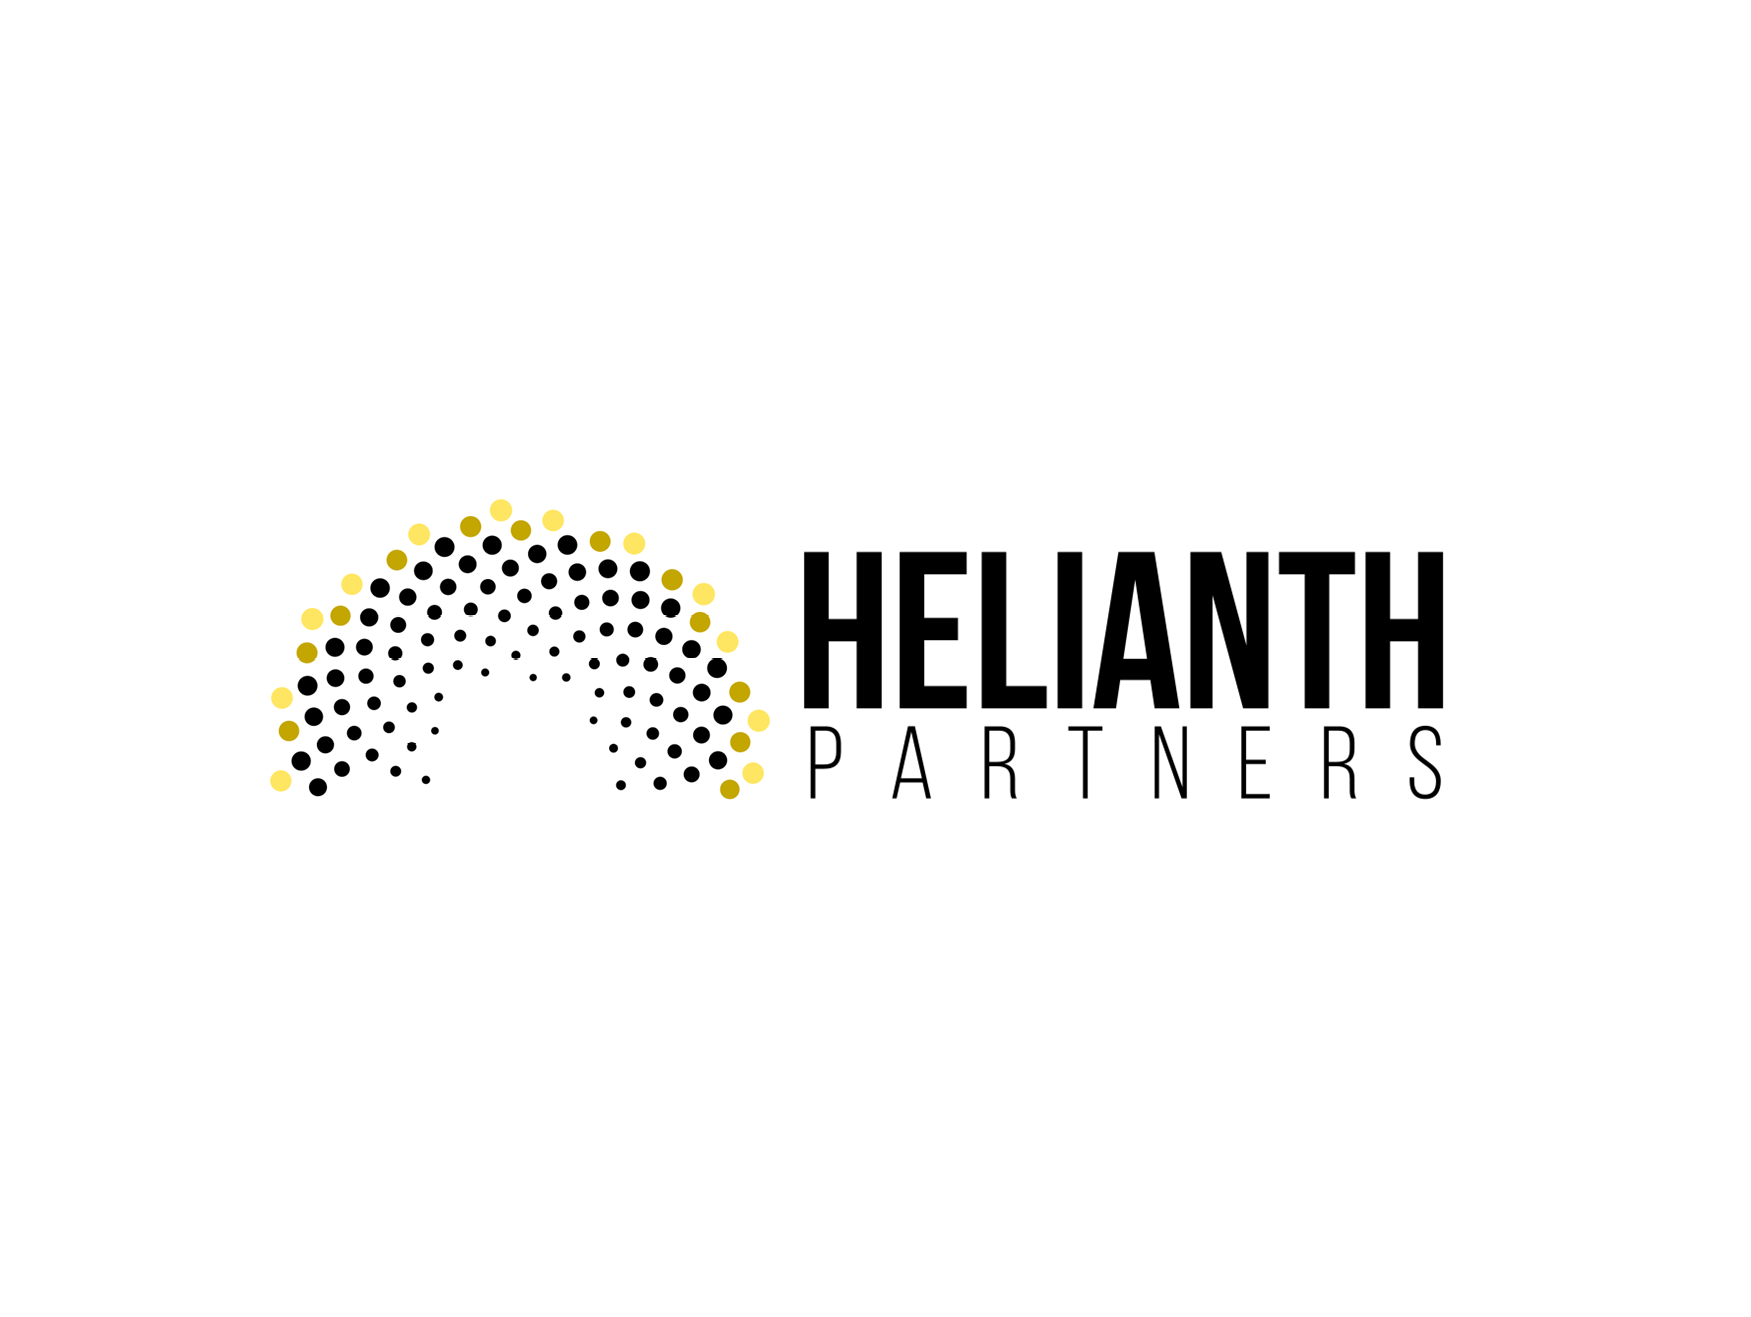 Charting Pathways to a Better Future - Helianth Partners